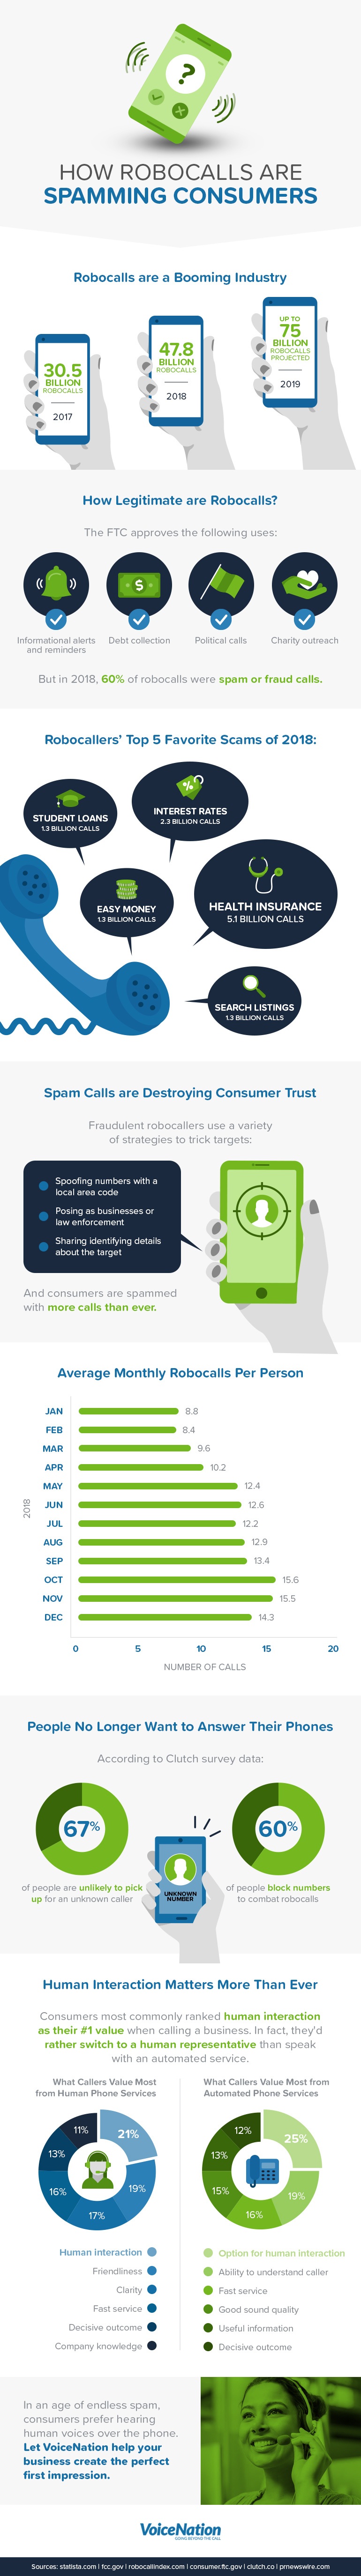 how robocalls are spamming customers infographic